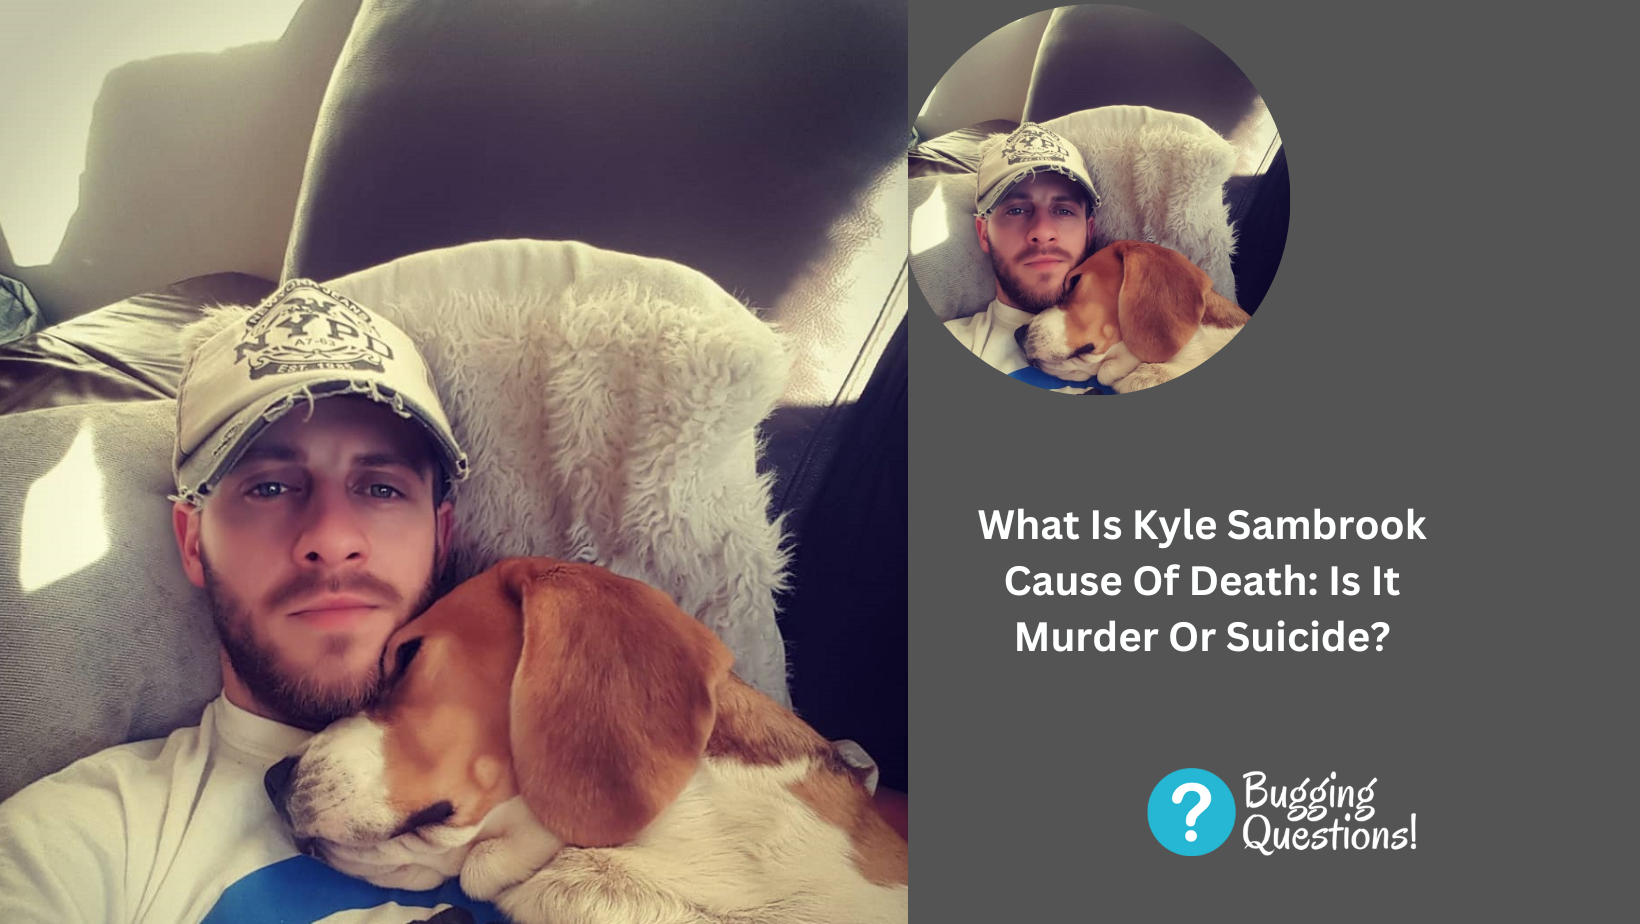 What Is Kyle Sambrook Cause Of Death: Is It Murder Or Suicide?